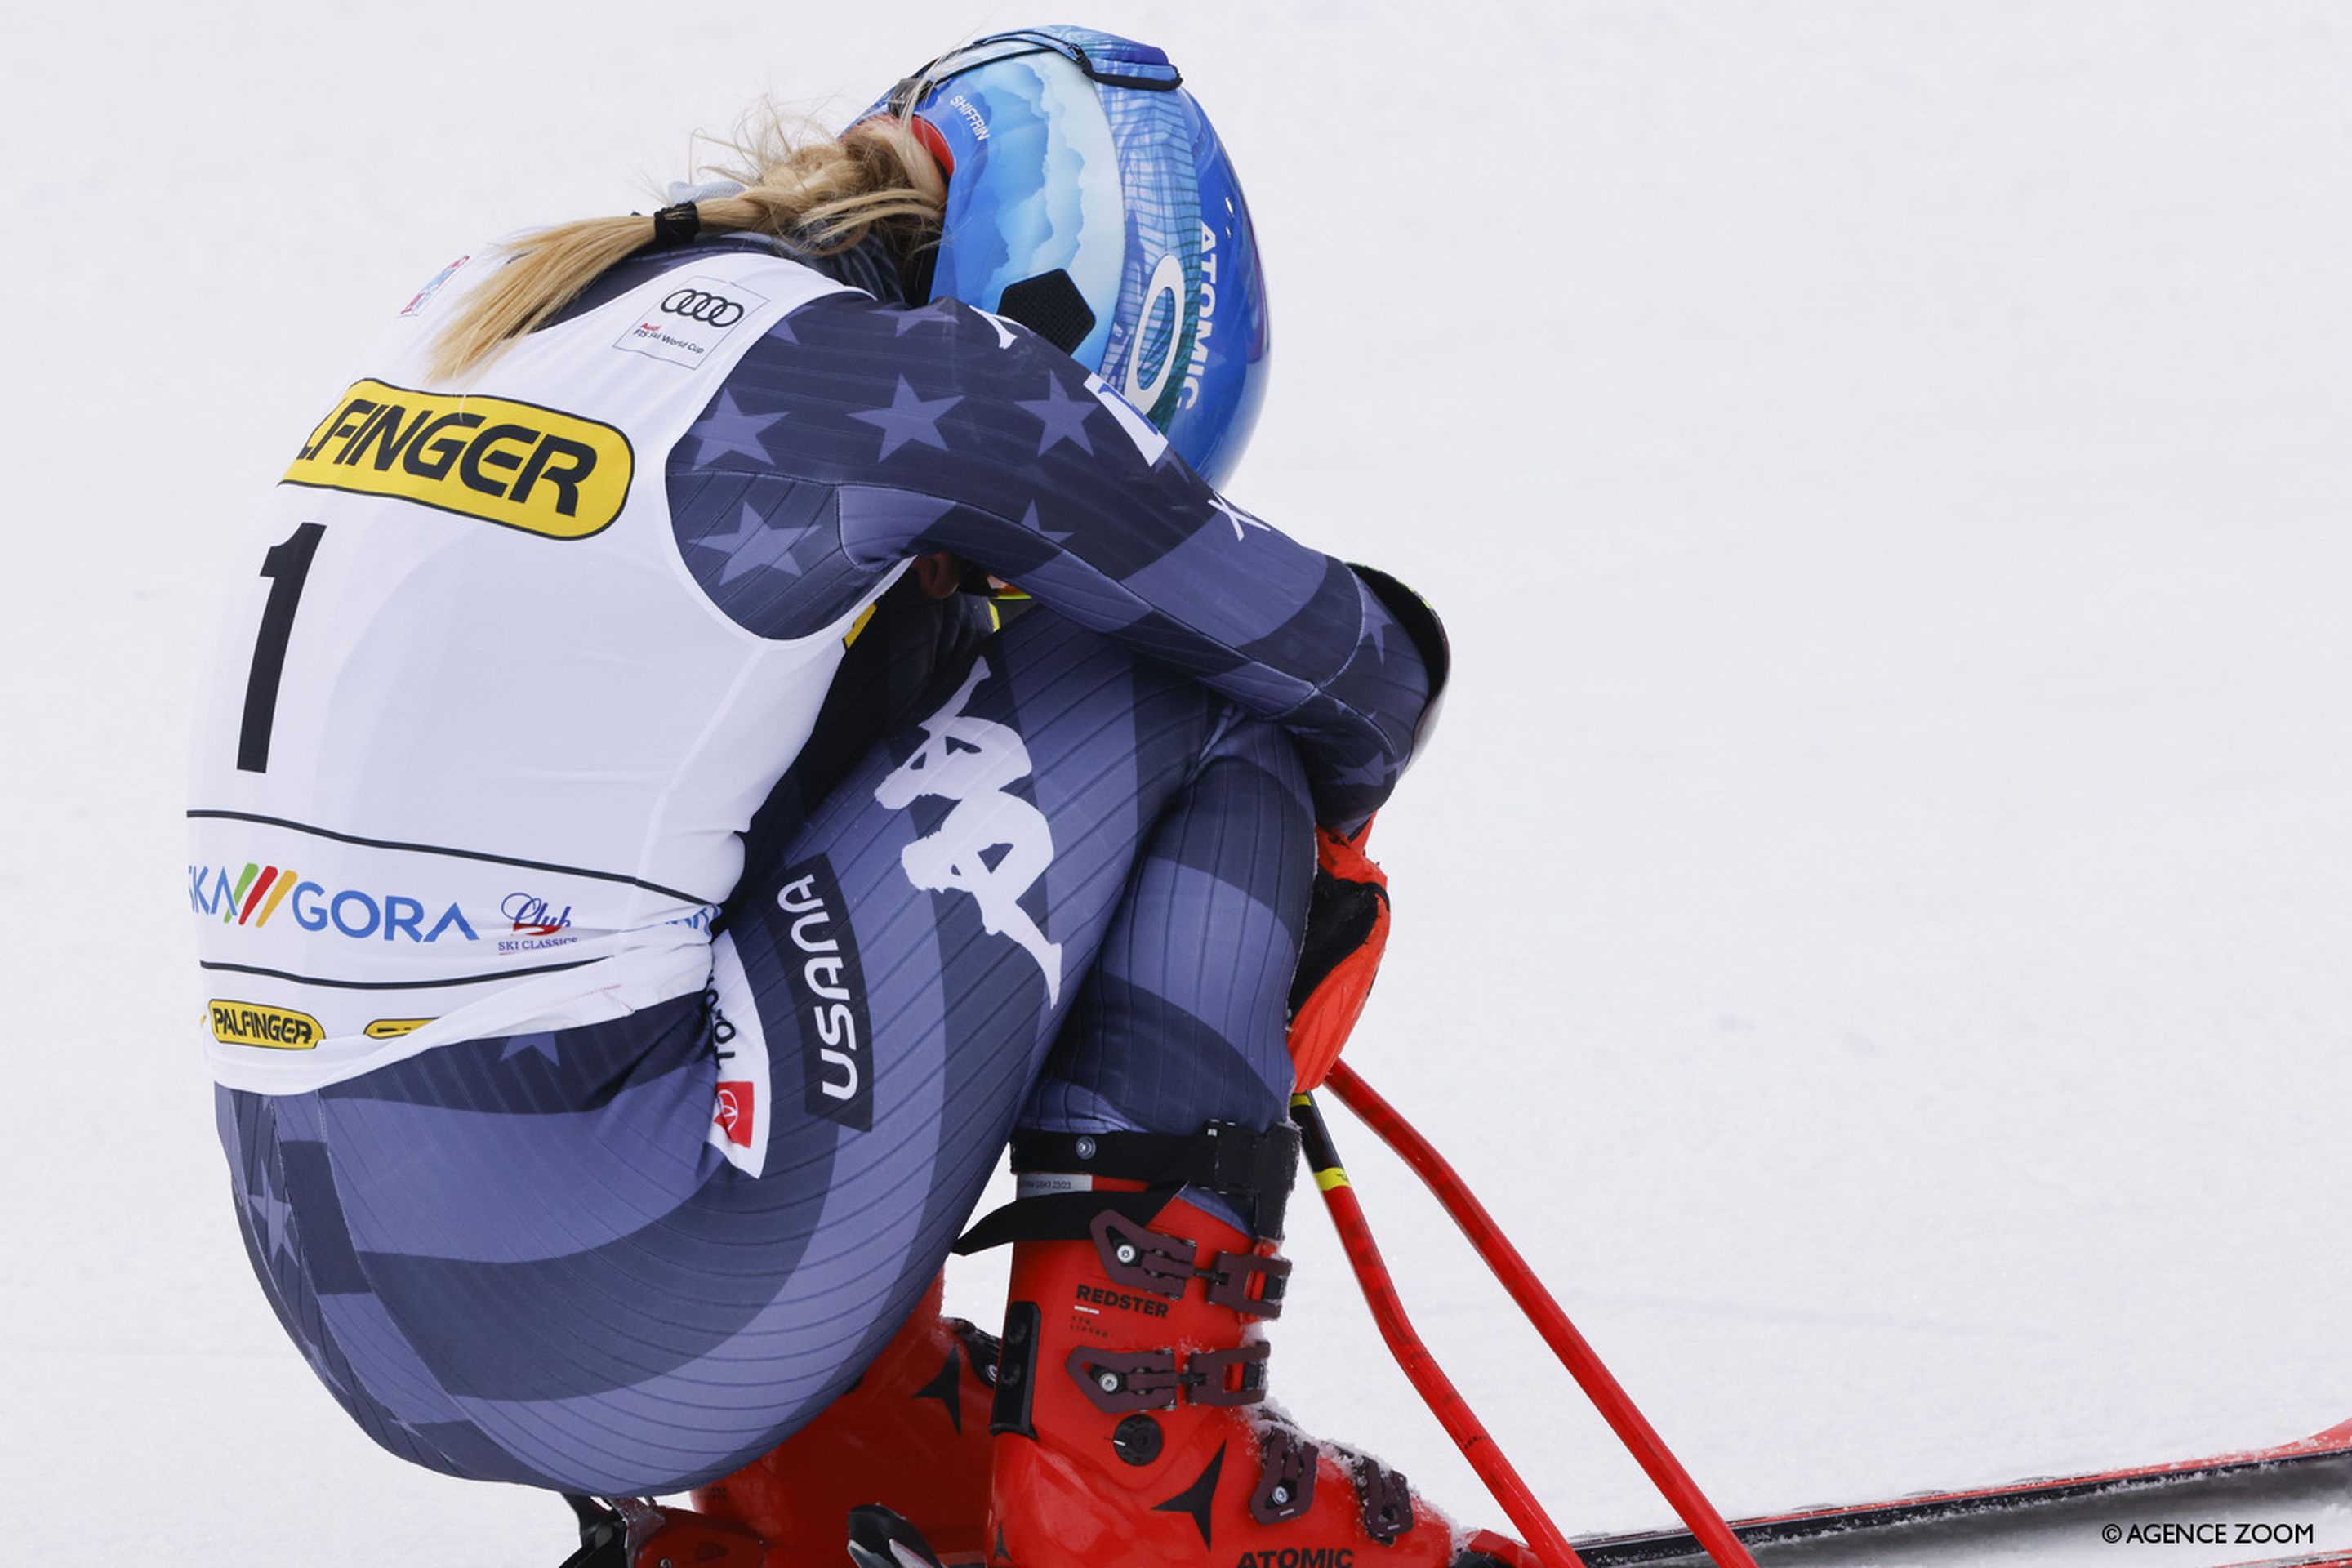 Shiffrin drops to her knees in disbelief after winning her 82nd World Cup race (Agence Zoom)